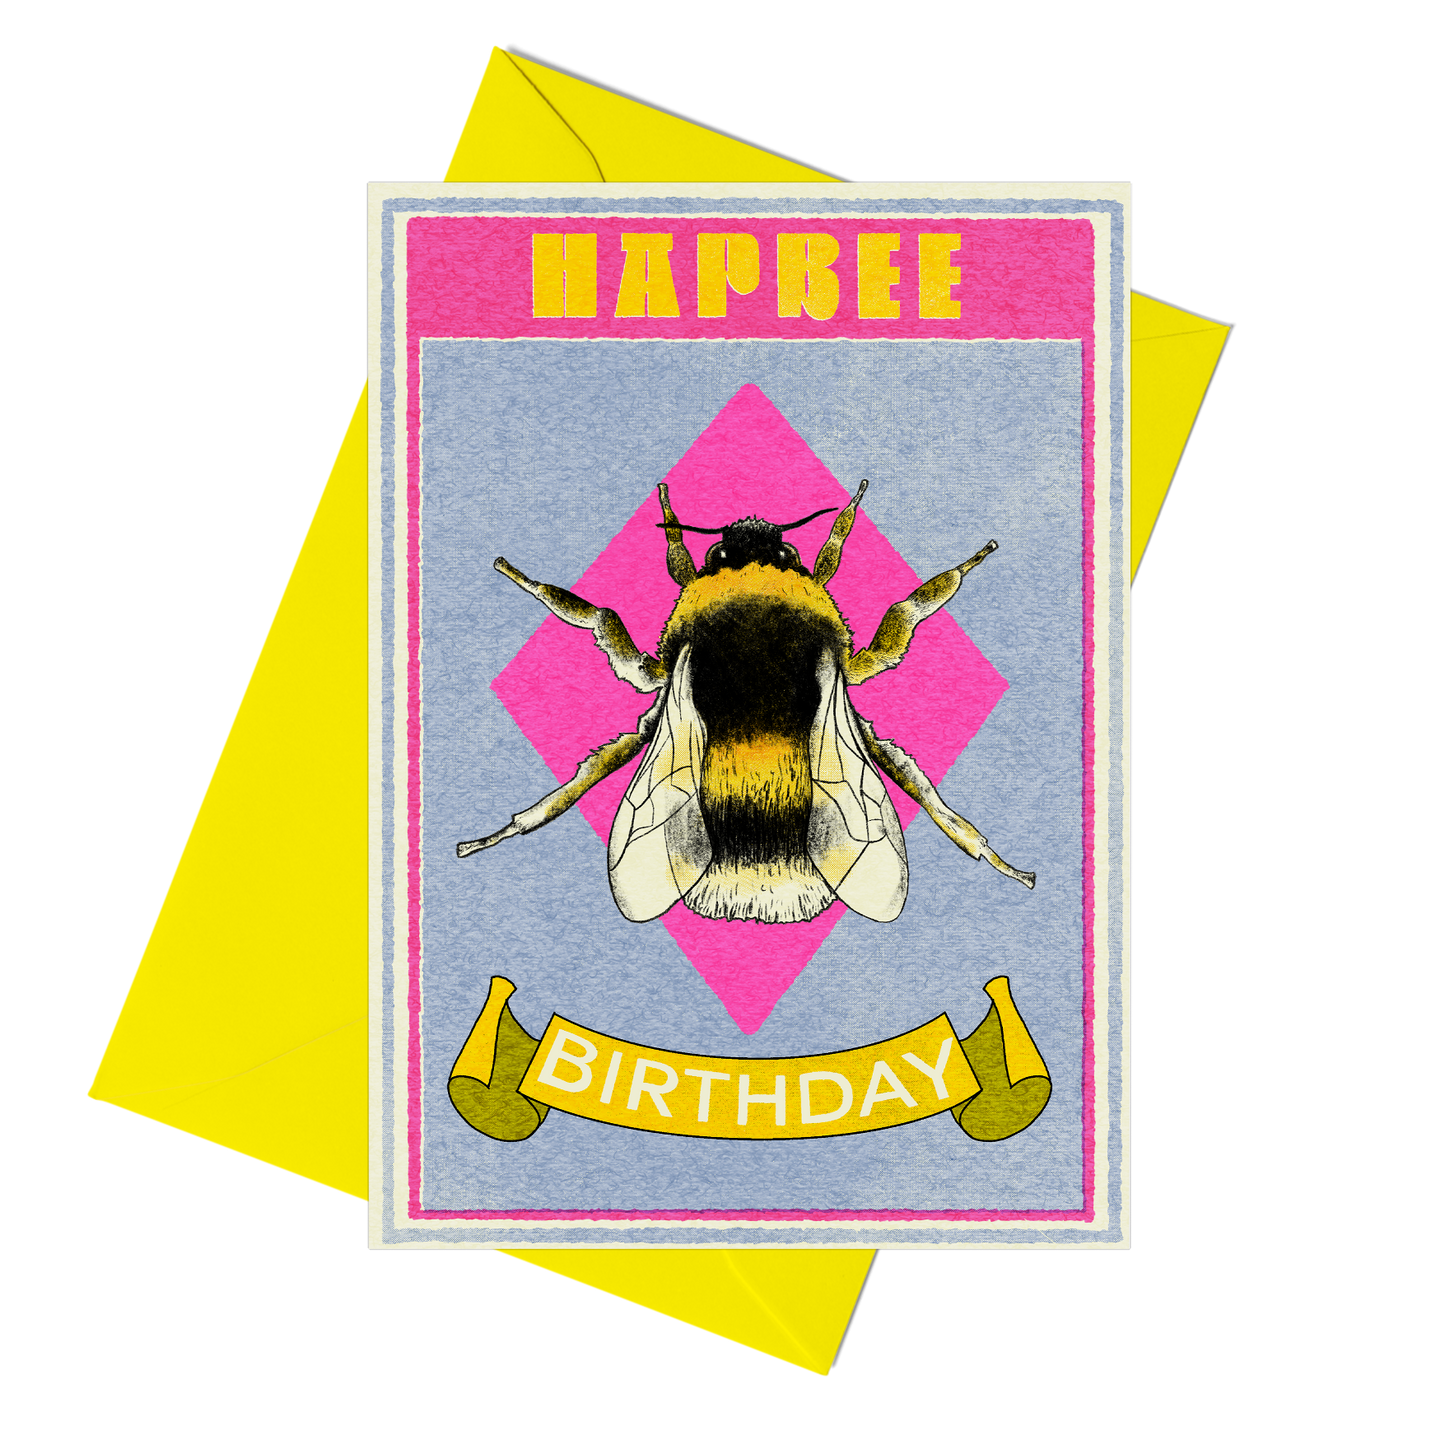 happy birthday bumble bee card by fawn and thistle